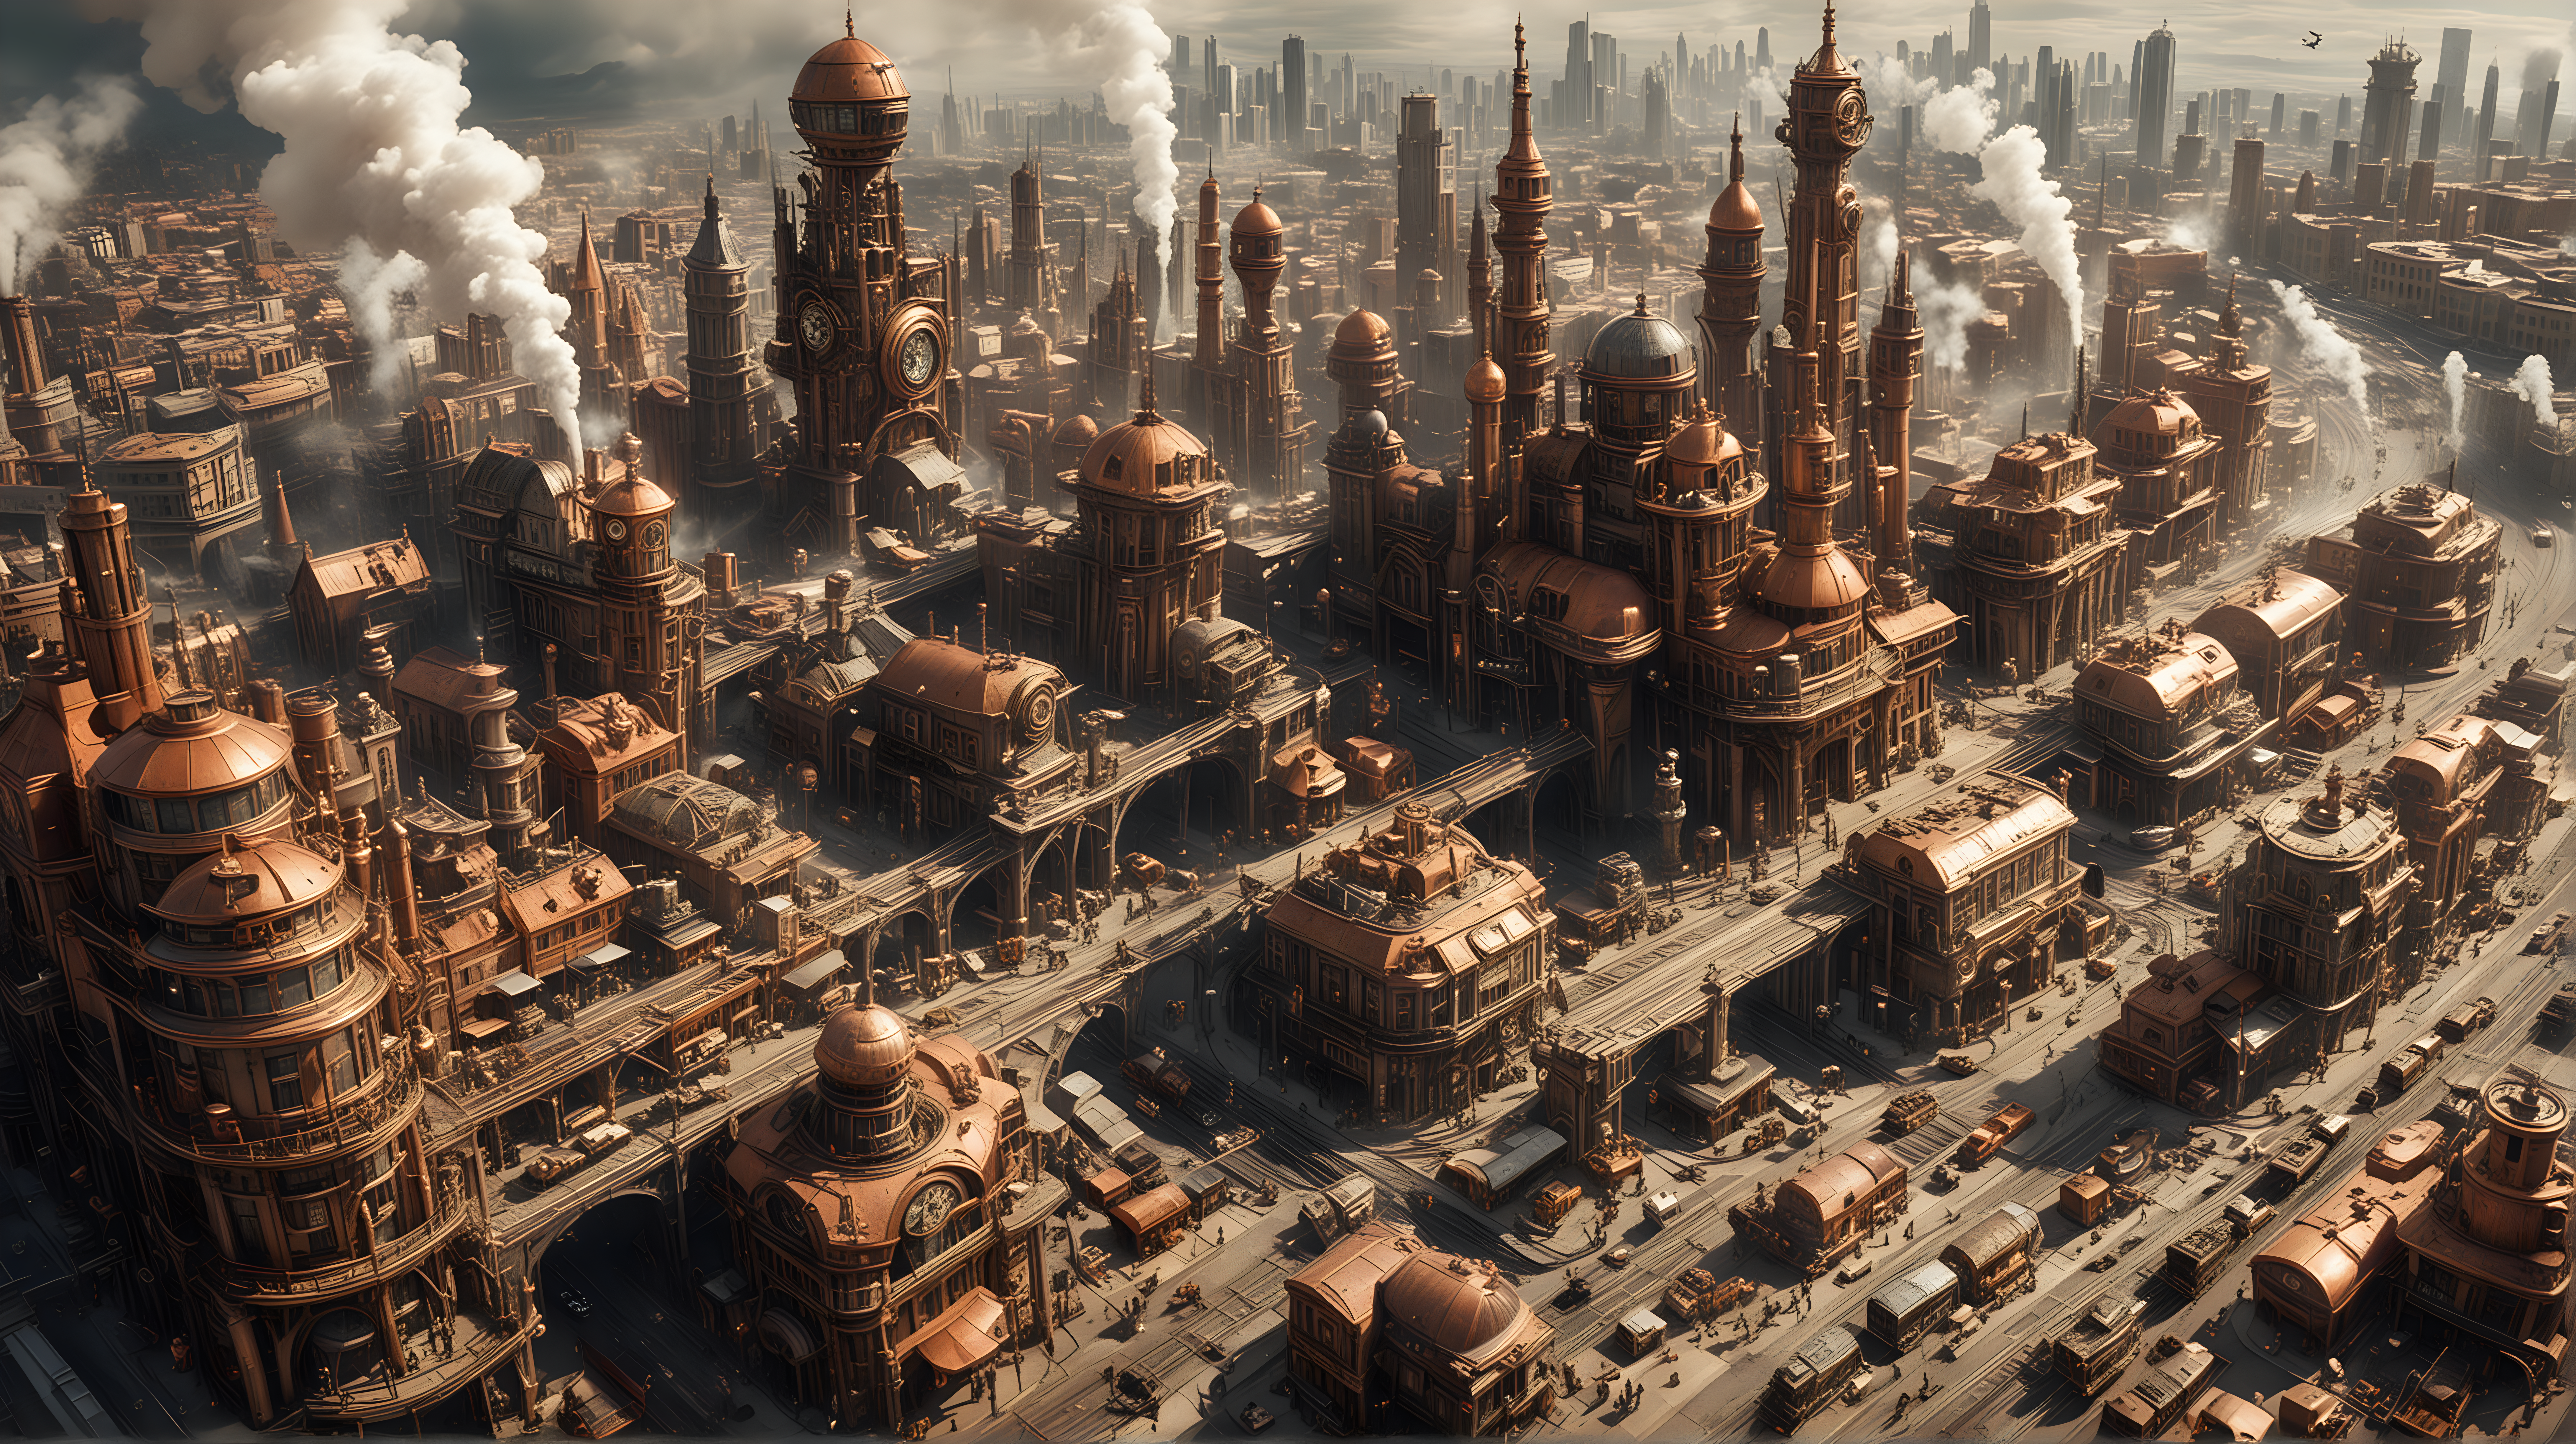 Glimpses of a Sunlit Steampunk Metropolis Towers Tracks and Brass Constructions